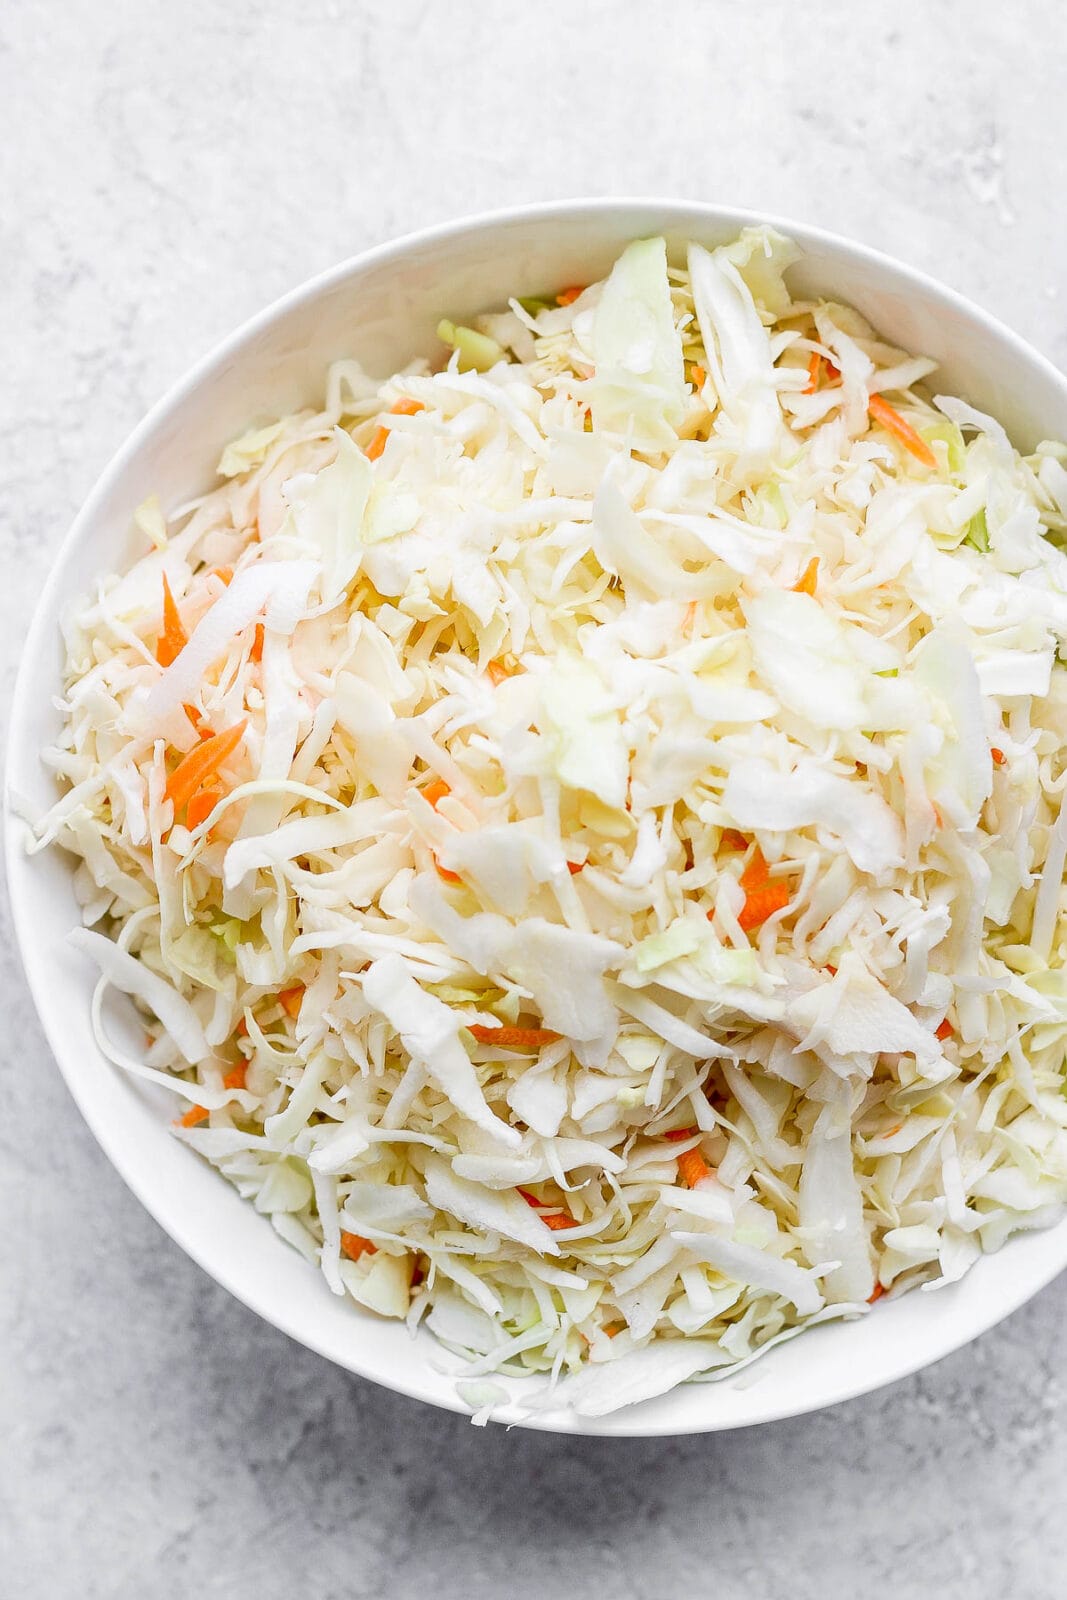 Bowl of coleslaw mix and diced onions.